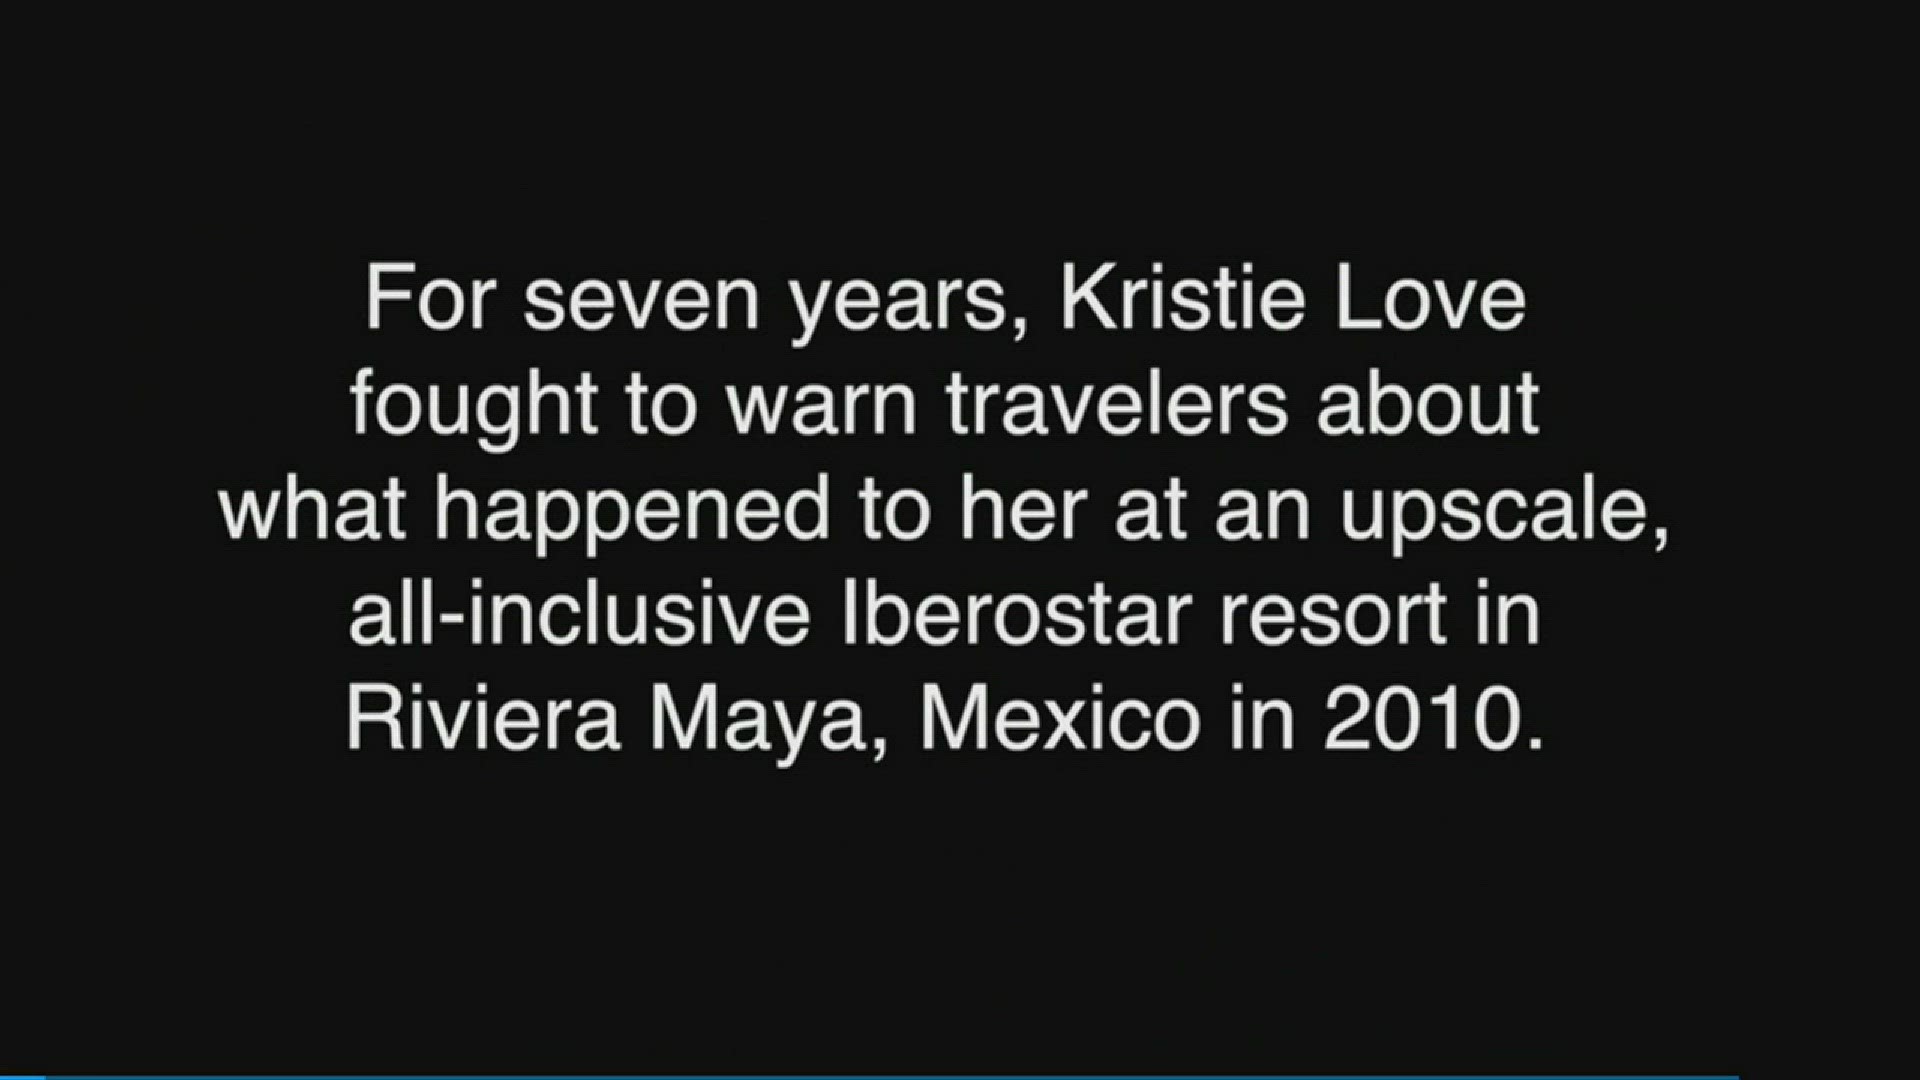 Kristie Love fought to warn travelers about how she was raped at an Iberostar resort in Riviera Maya, Mexico, in 2010. The Dallas woman posted her story on TripAdvisor, which refused to publish it. Until now.